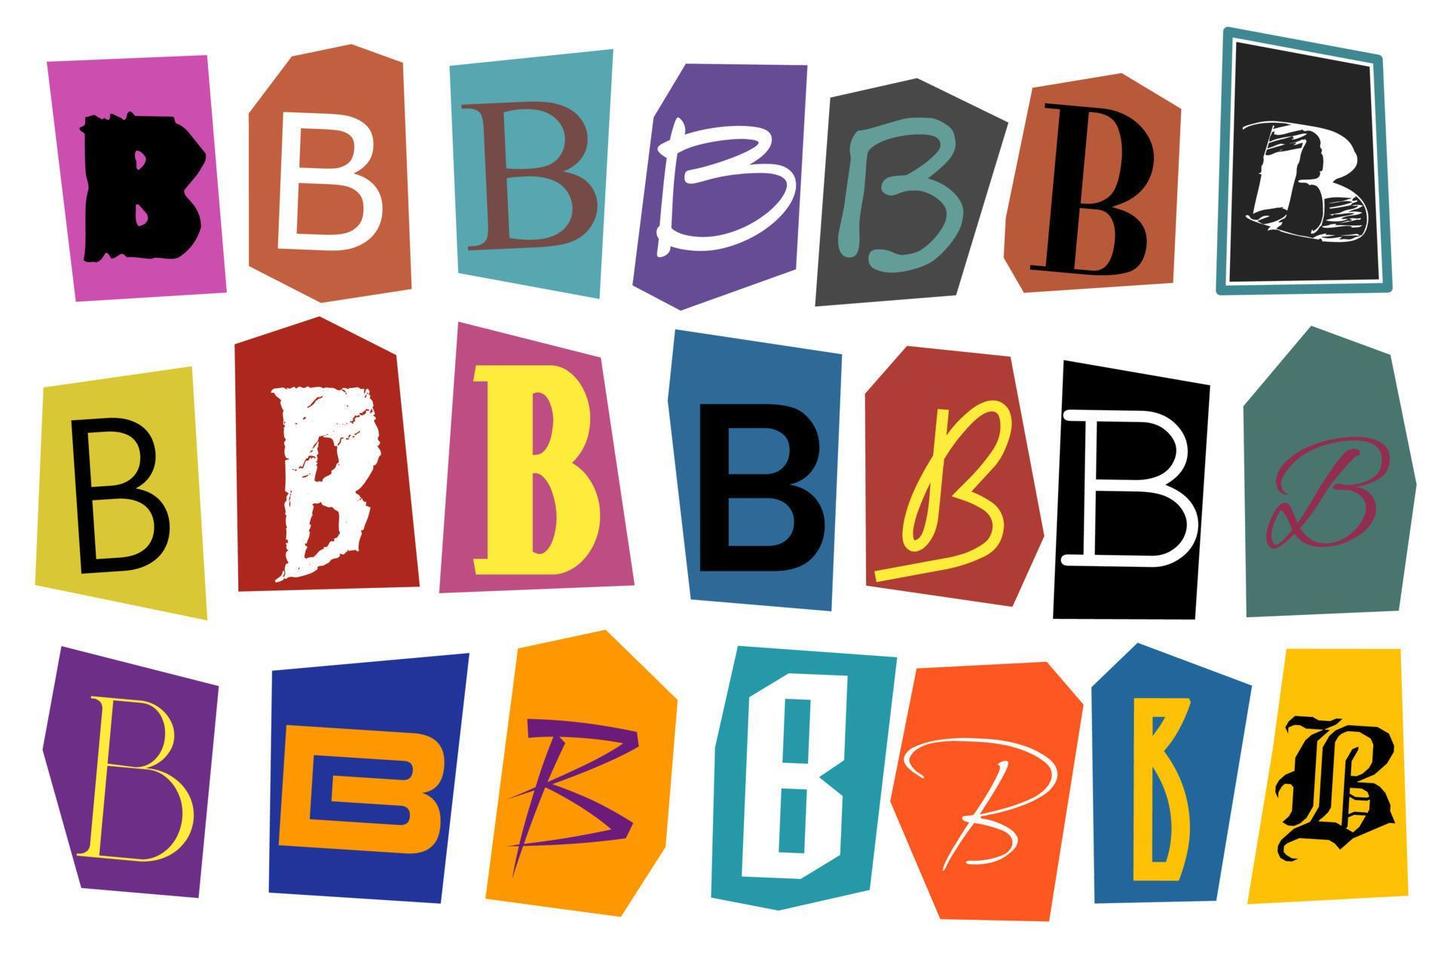 Alphabet B - vector cut newspaper and magazine letters, paper style ransom note letter